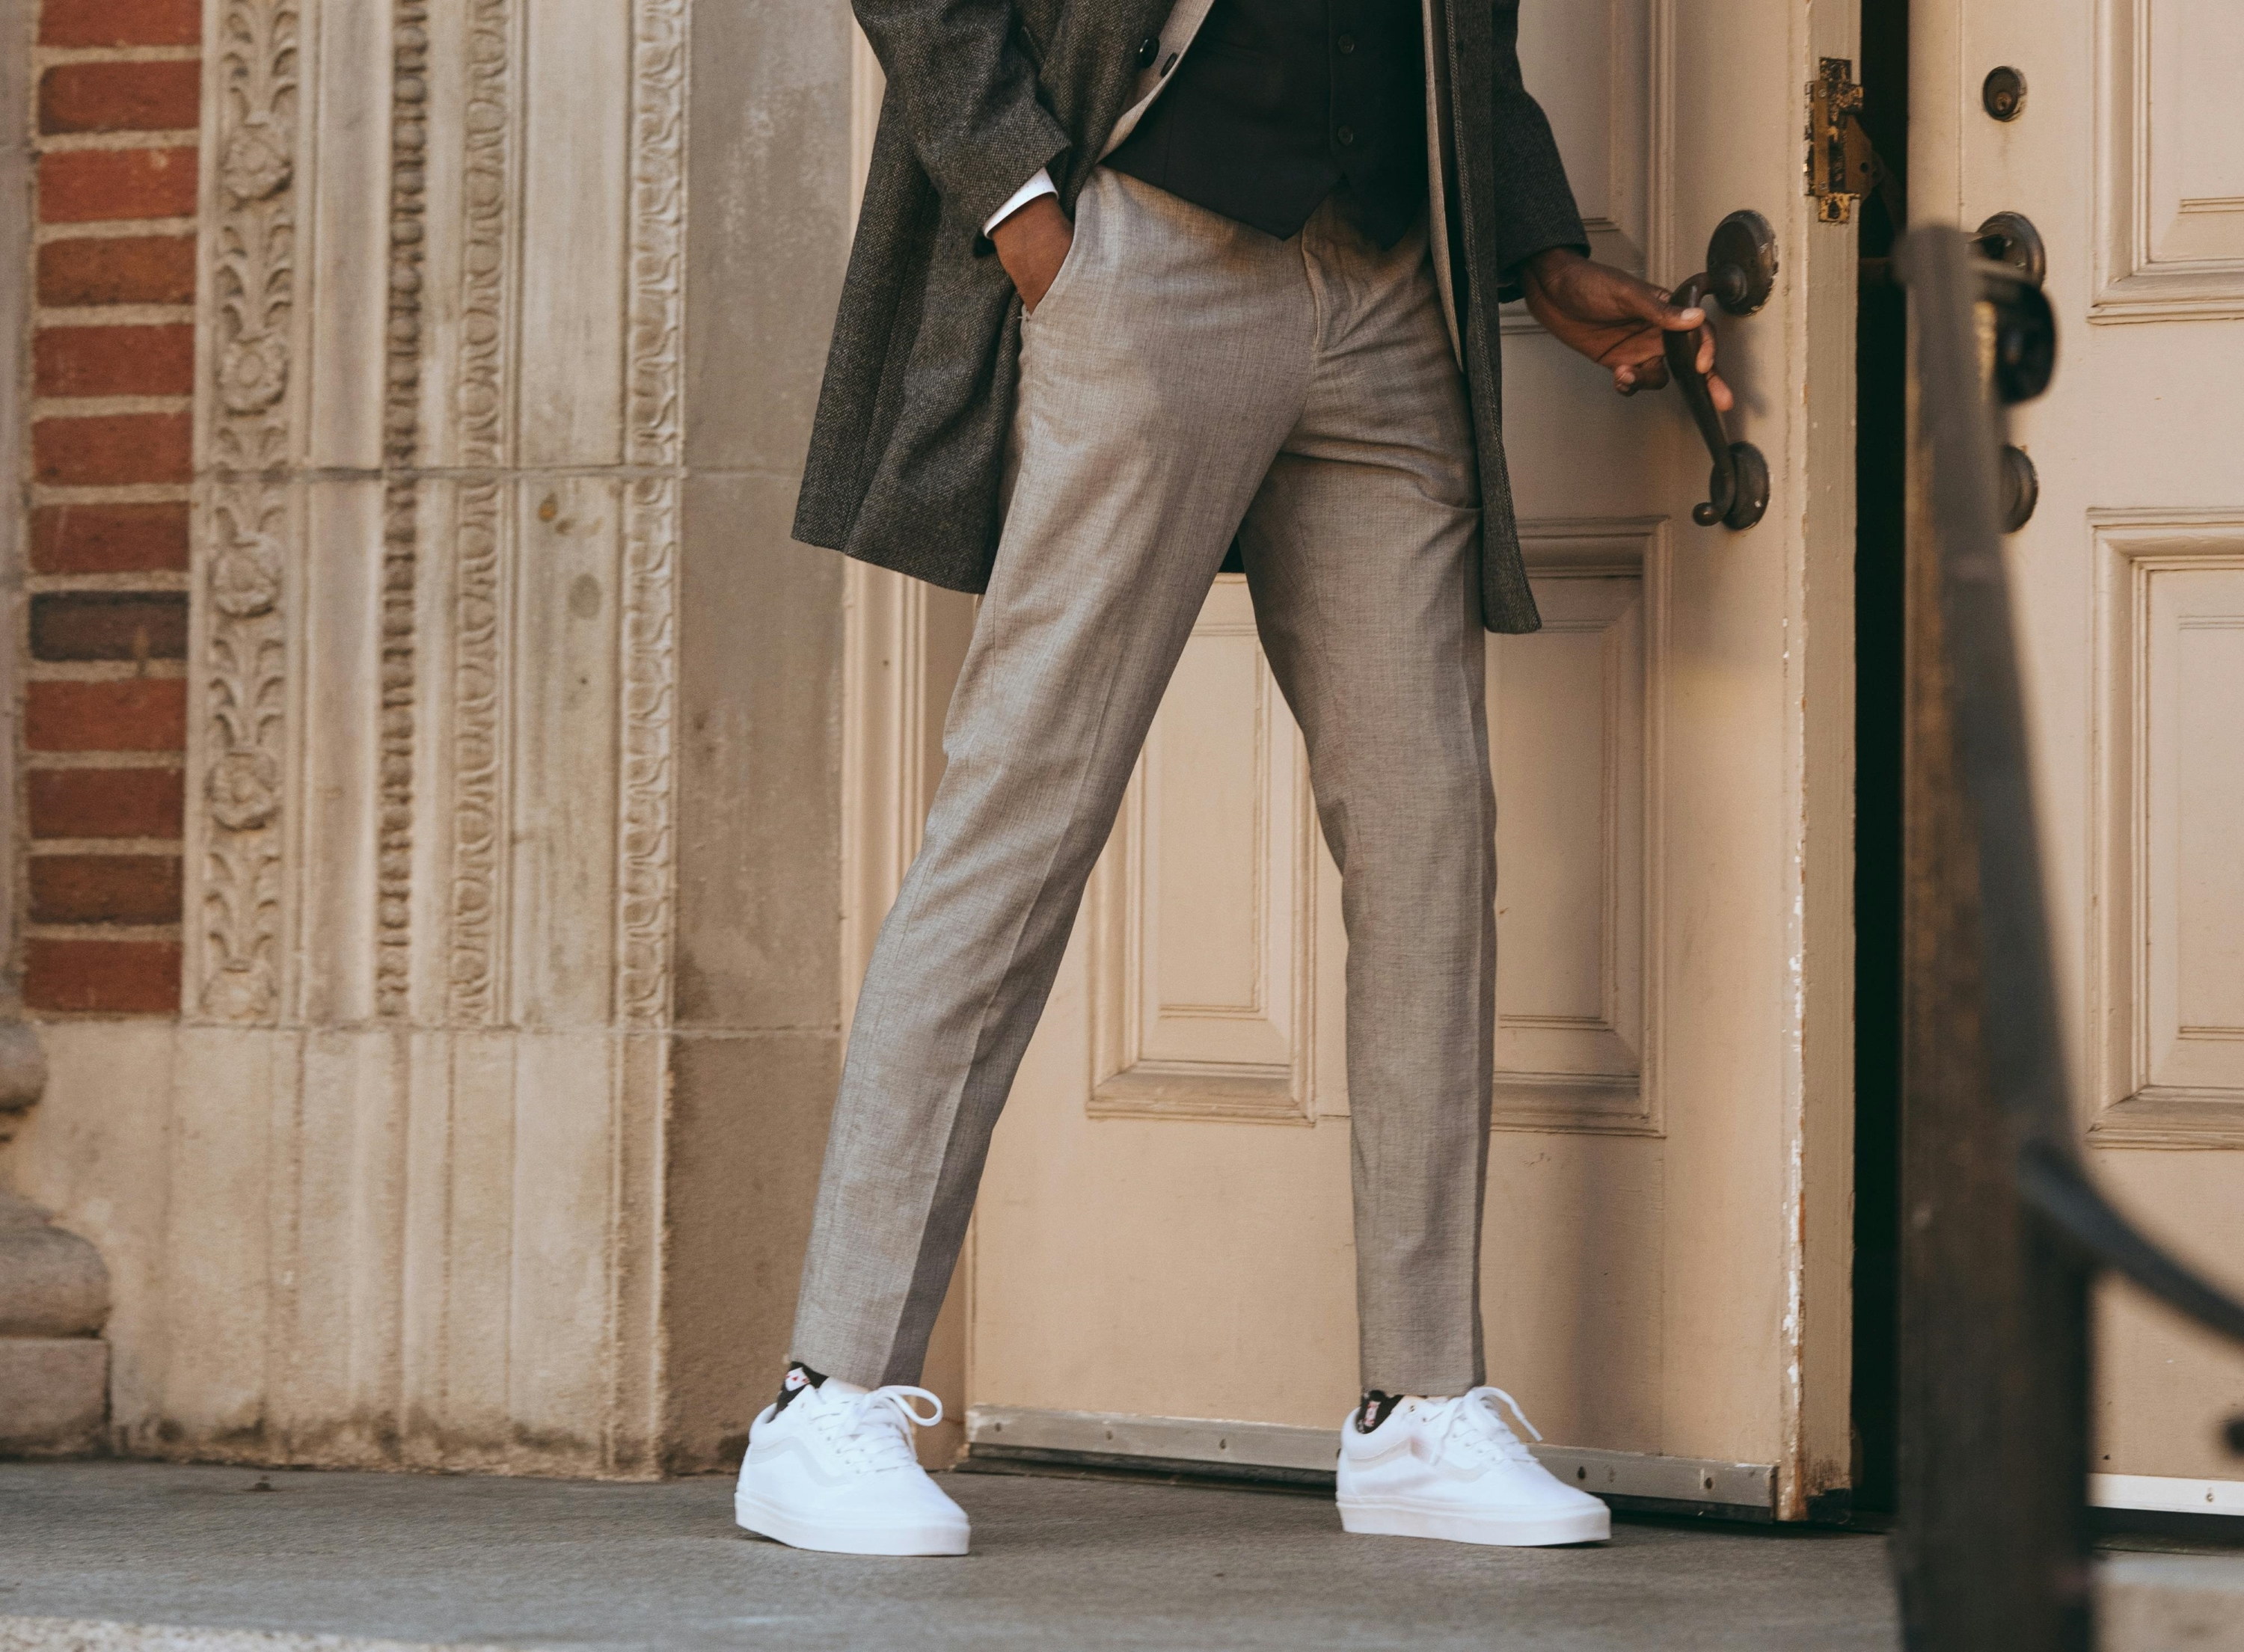 How To Match The Shoes To Your Trousers?